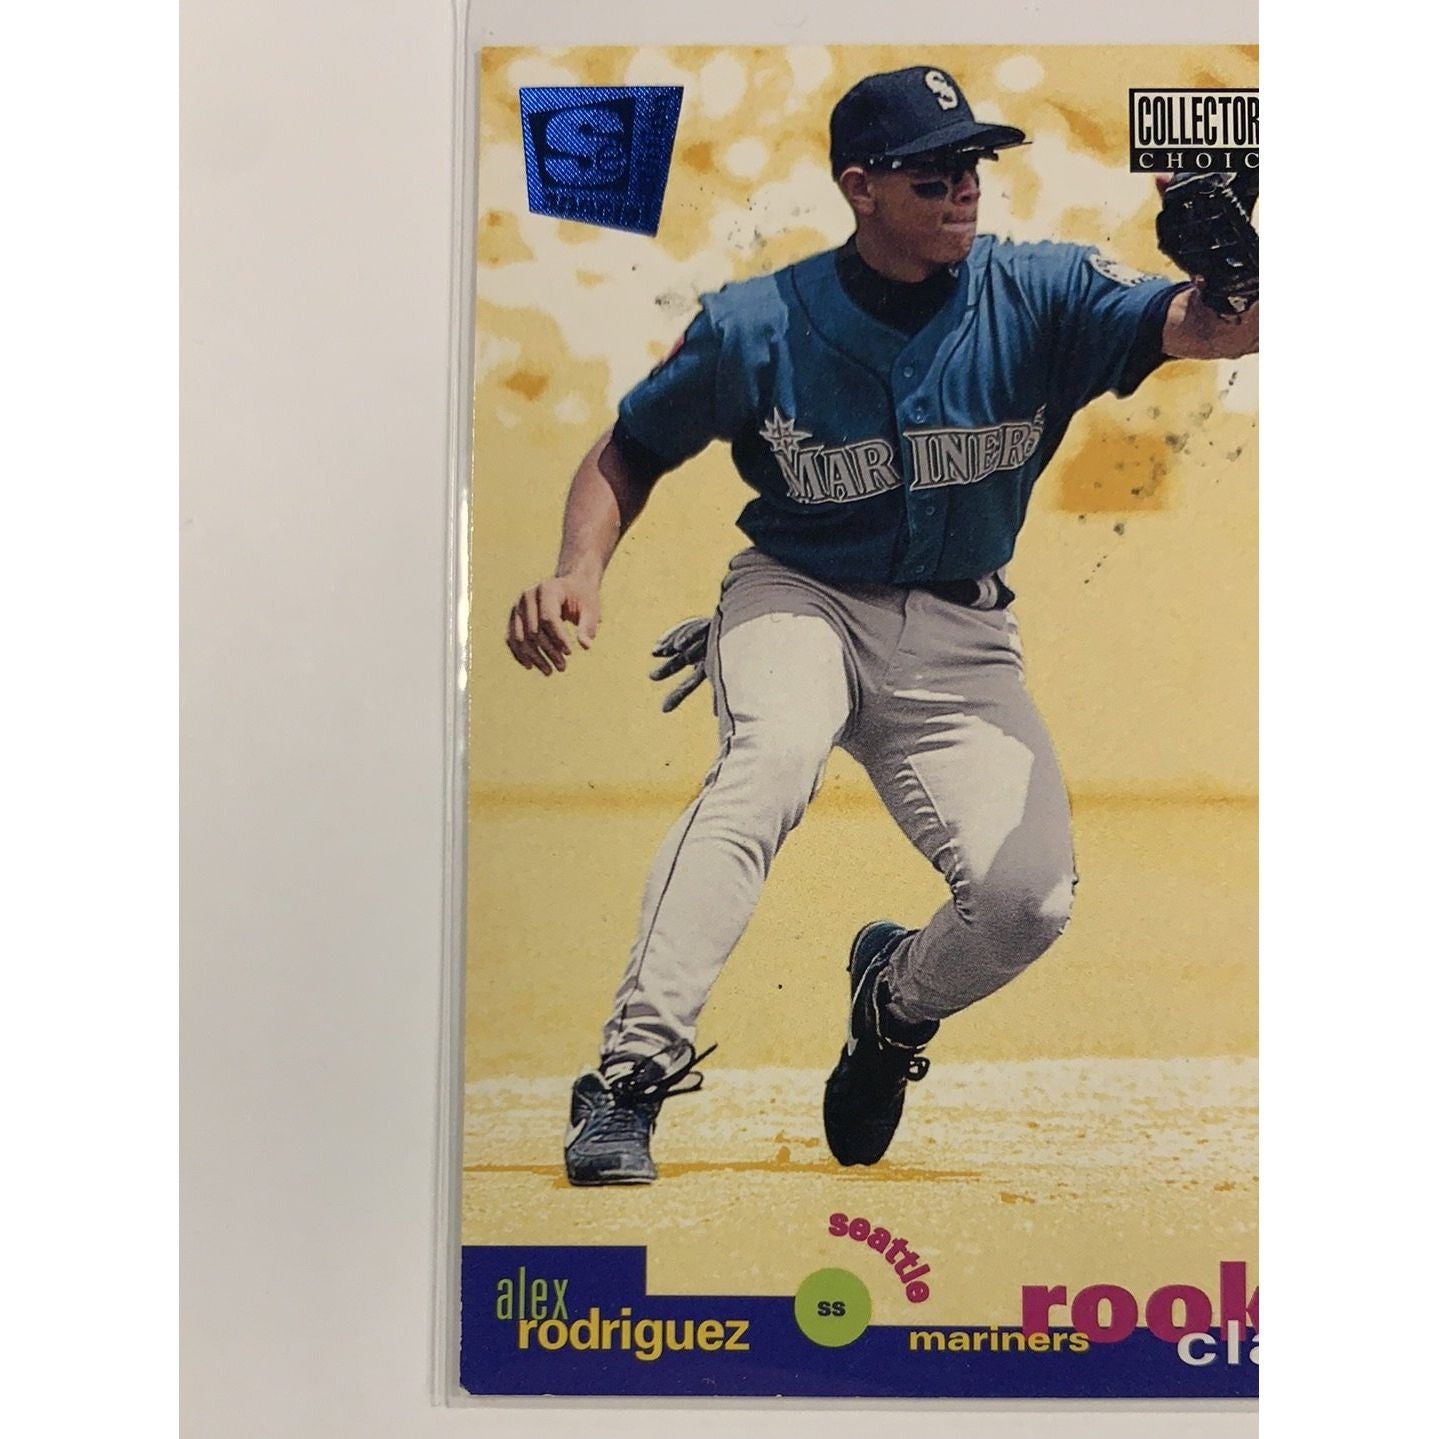  1995 Upper Deck Collectors Choice Alex Rodriguez Rookie Card  Local Legends Cards & Collectibles